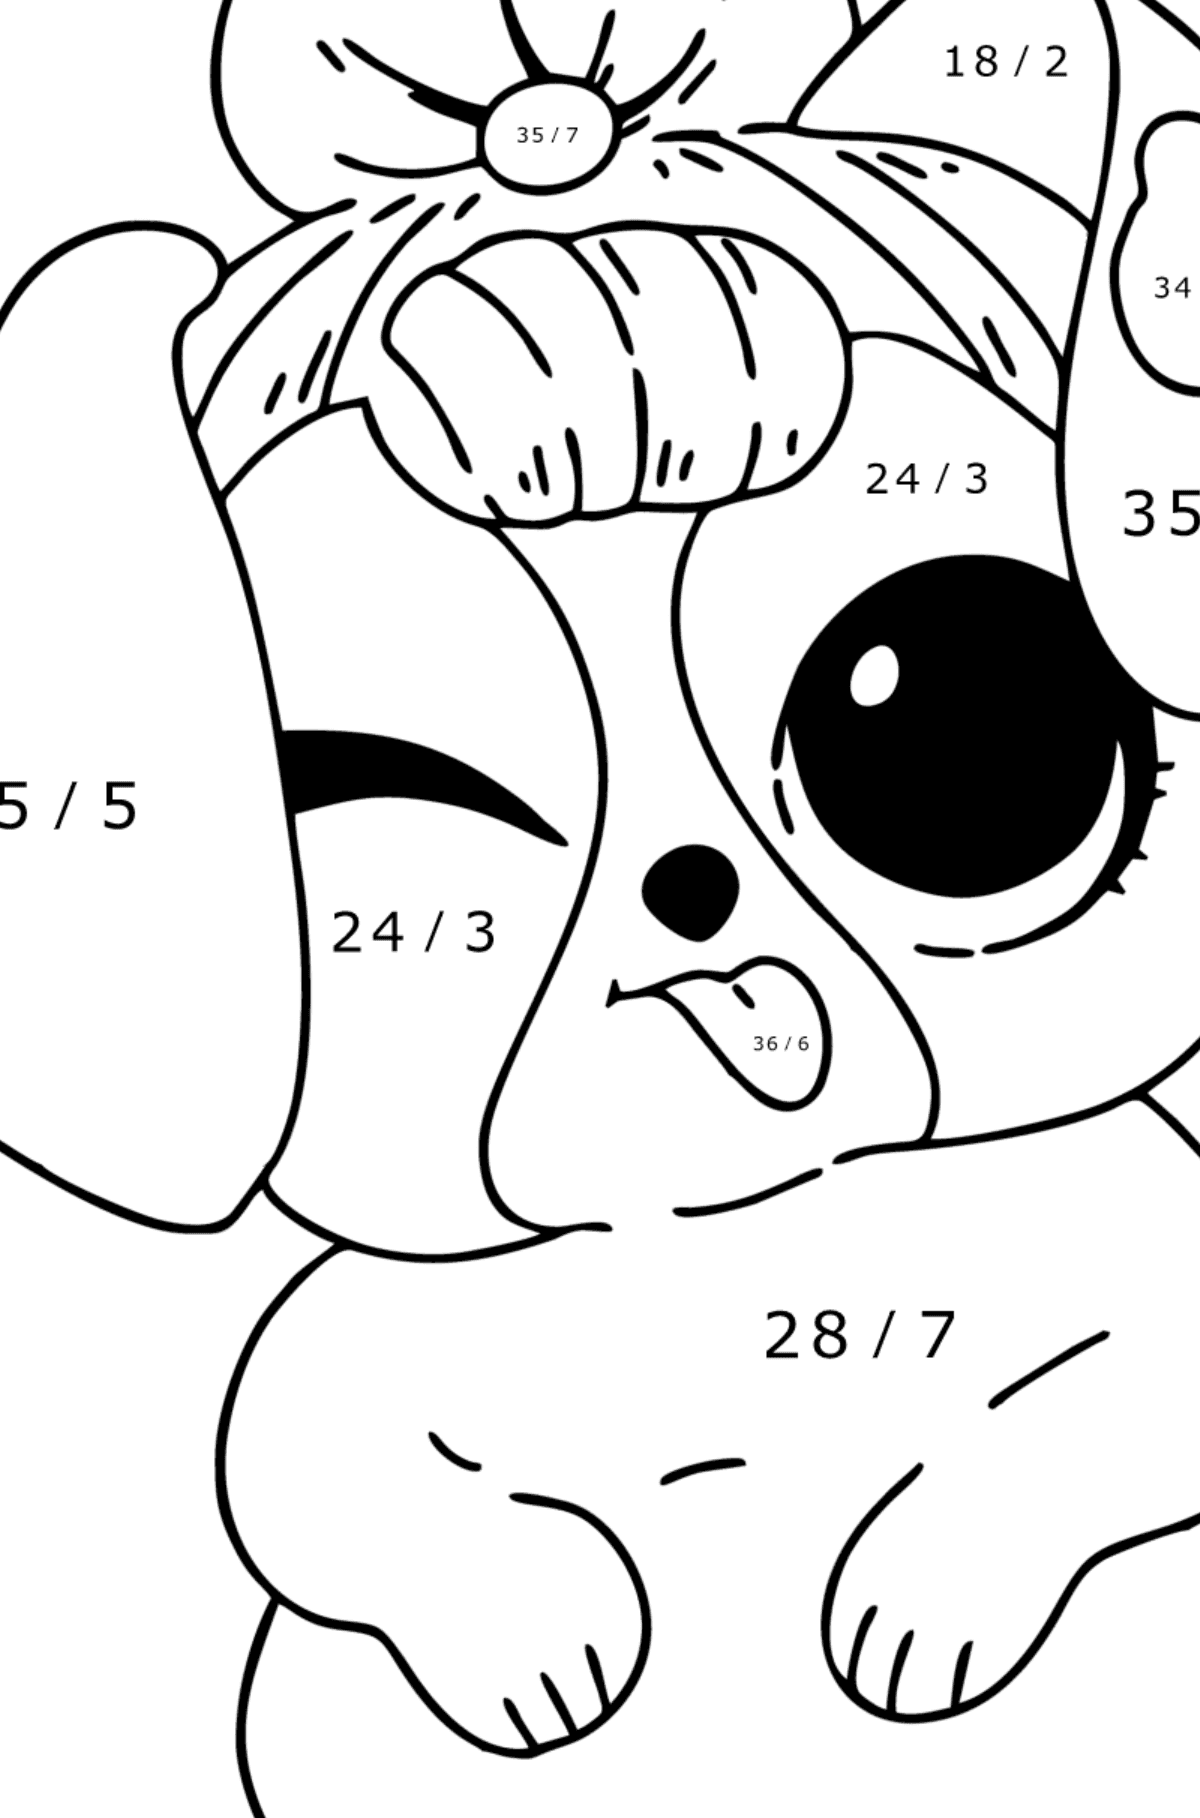 Coloring page LOL pet cute puppy - Math Coloring - Division for Kids